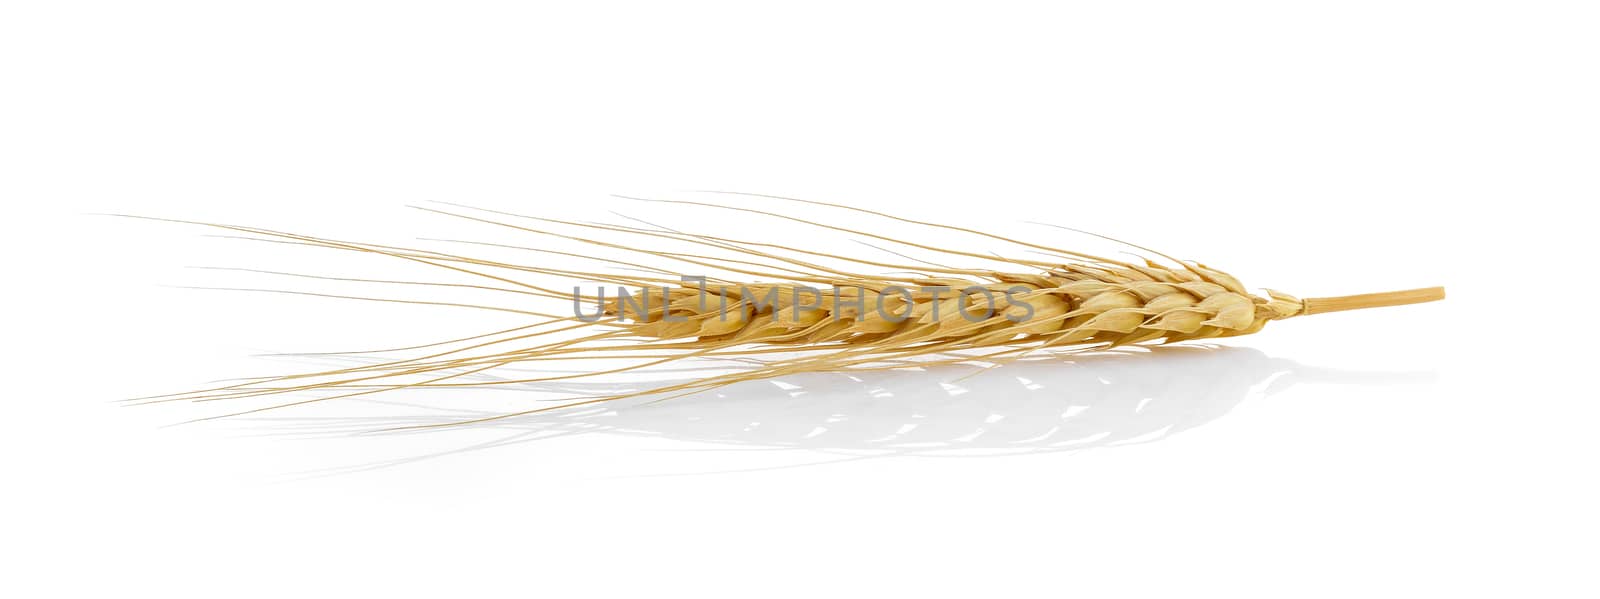 Closeup of a barley ear over a white background